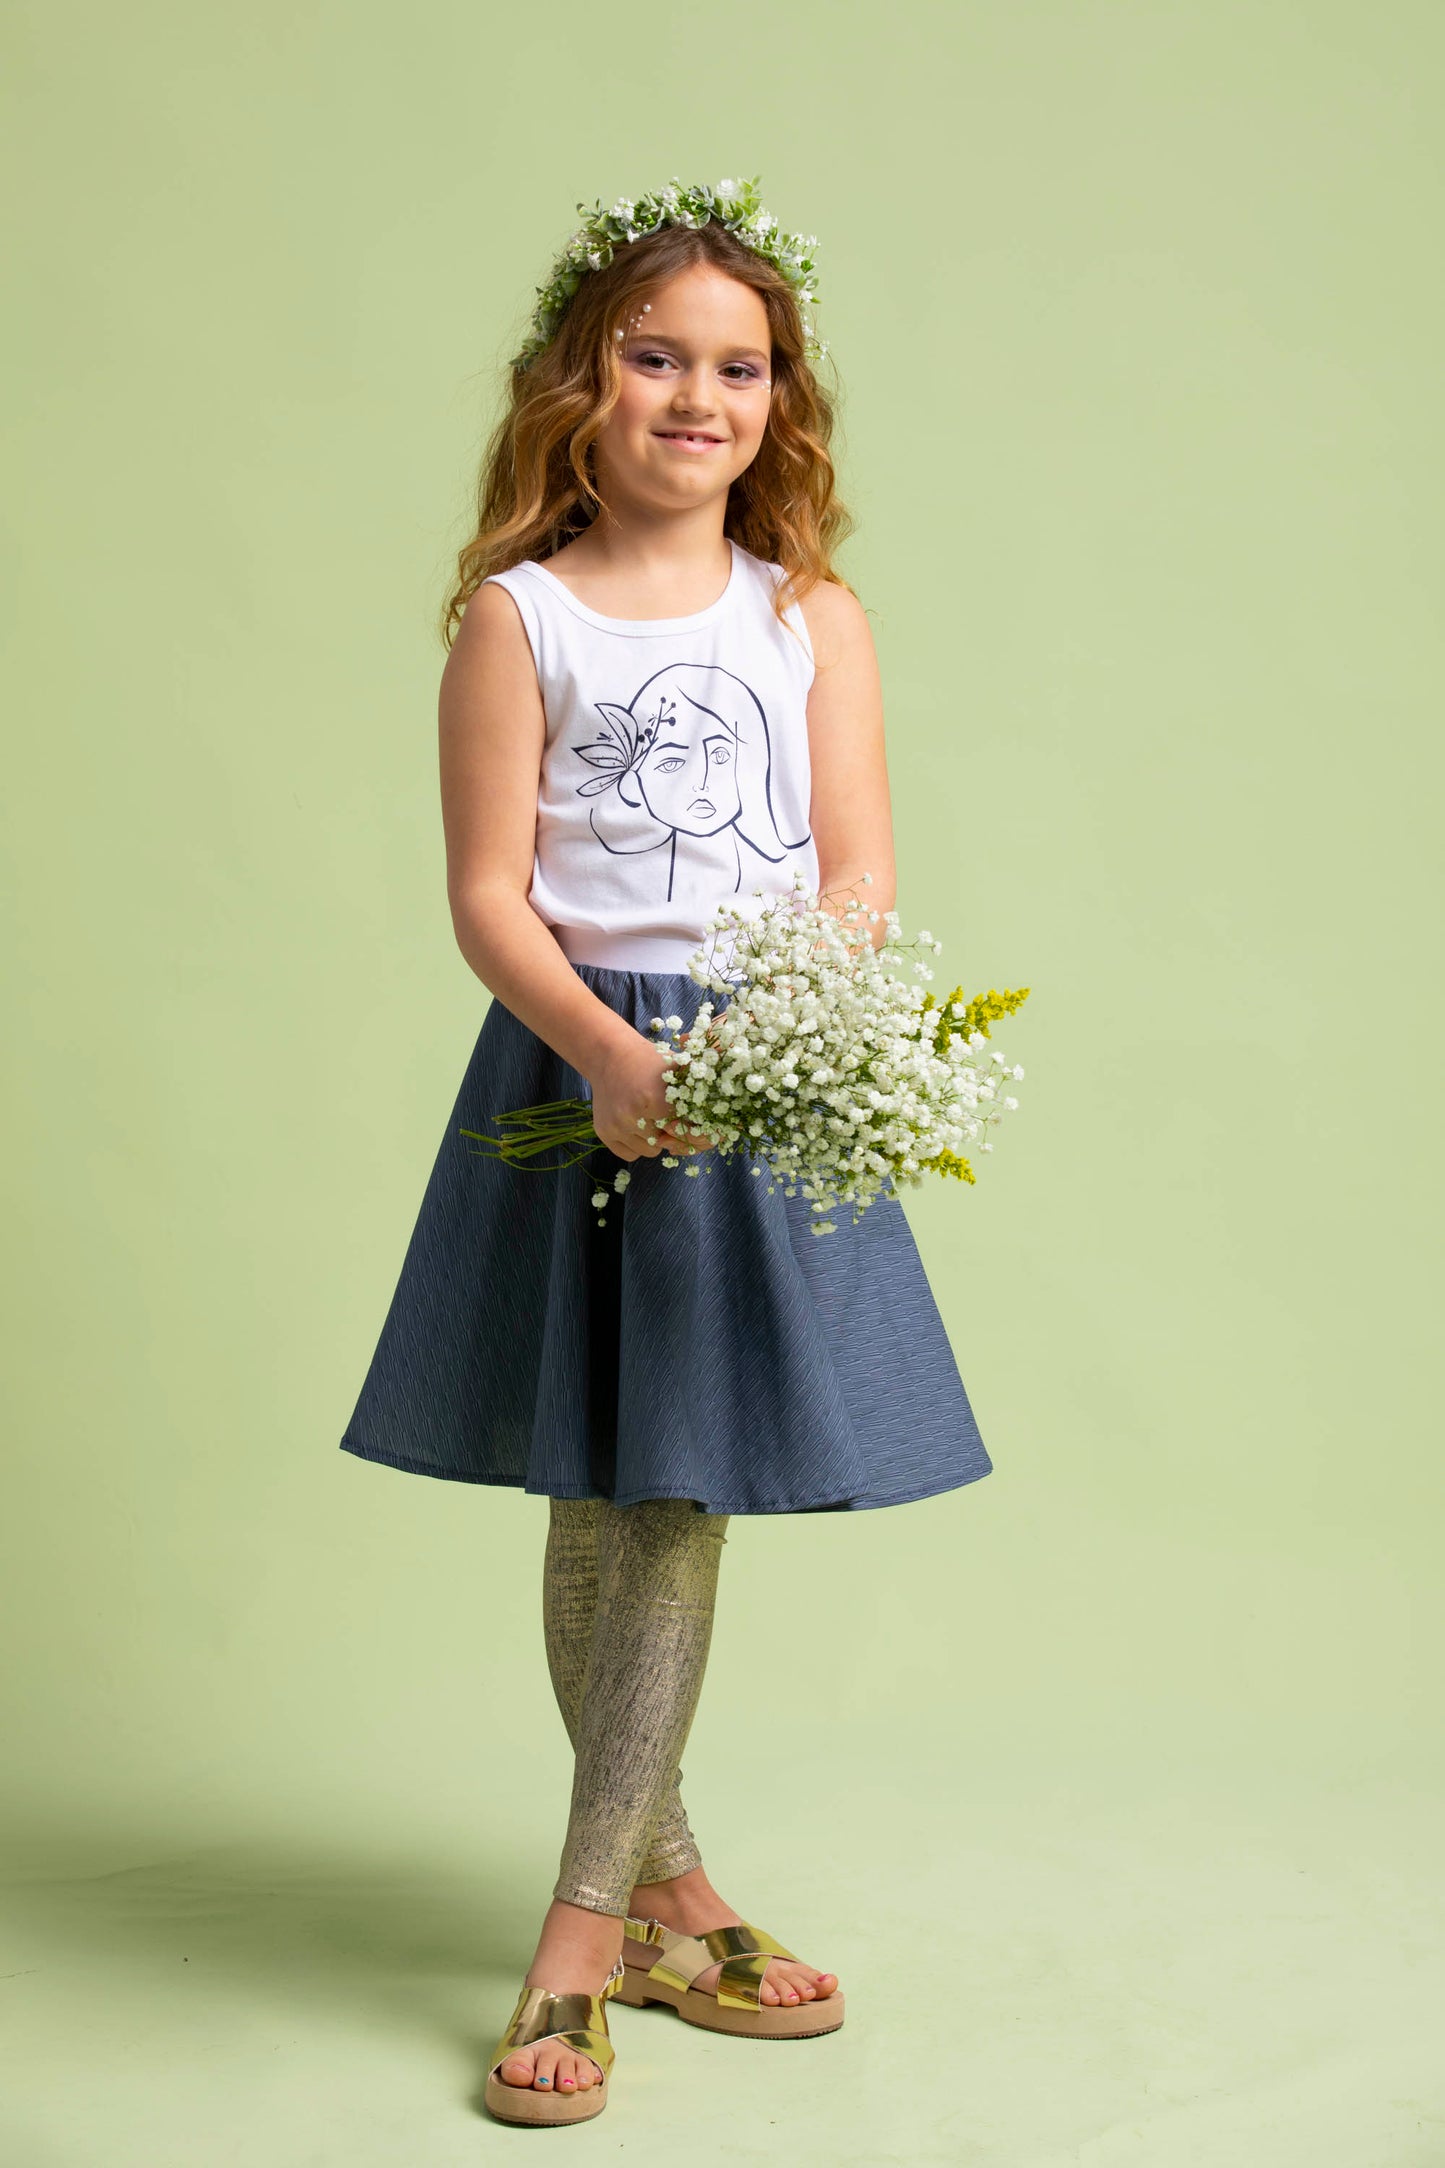 Cute young lady holds a handful of flowers while in her navy blue Mercedes Skirt and Ofelia T-Shirt